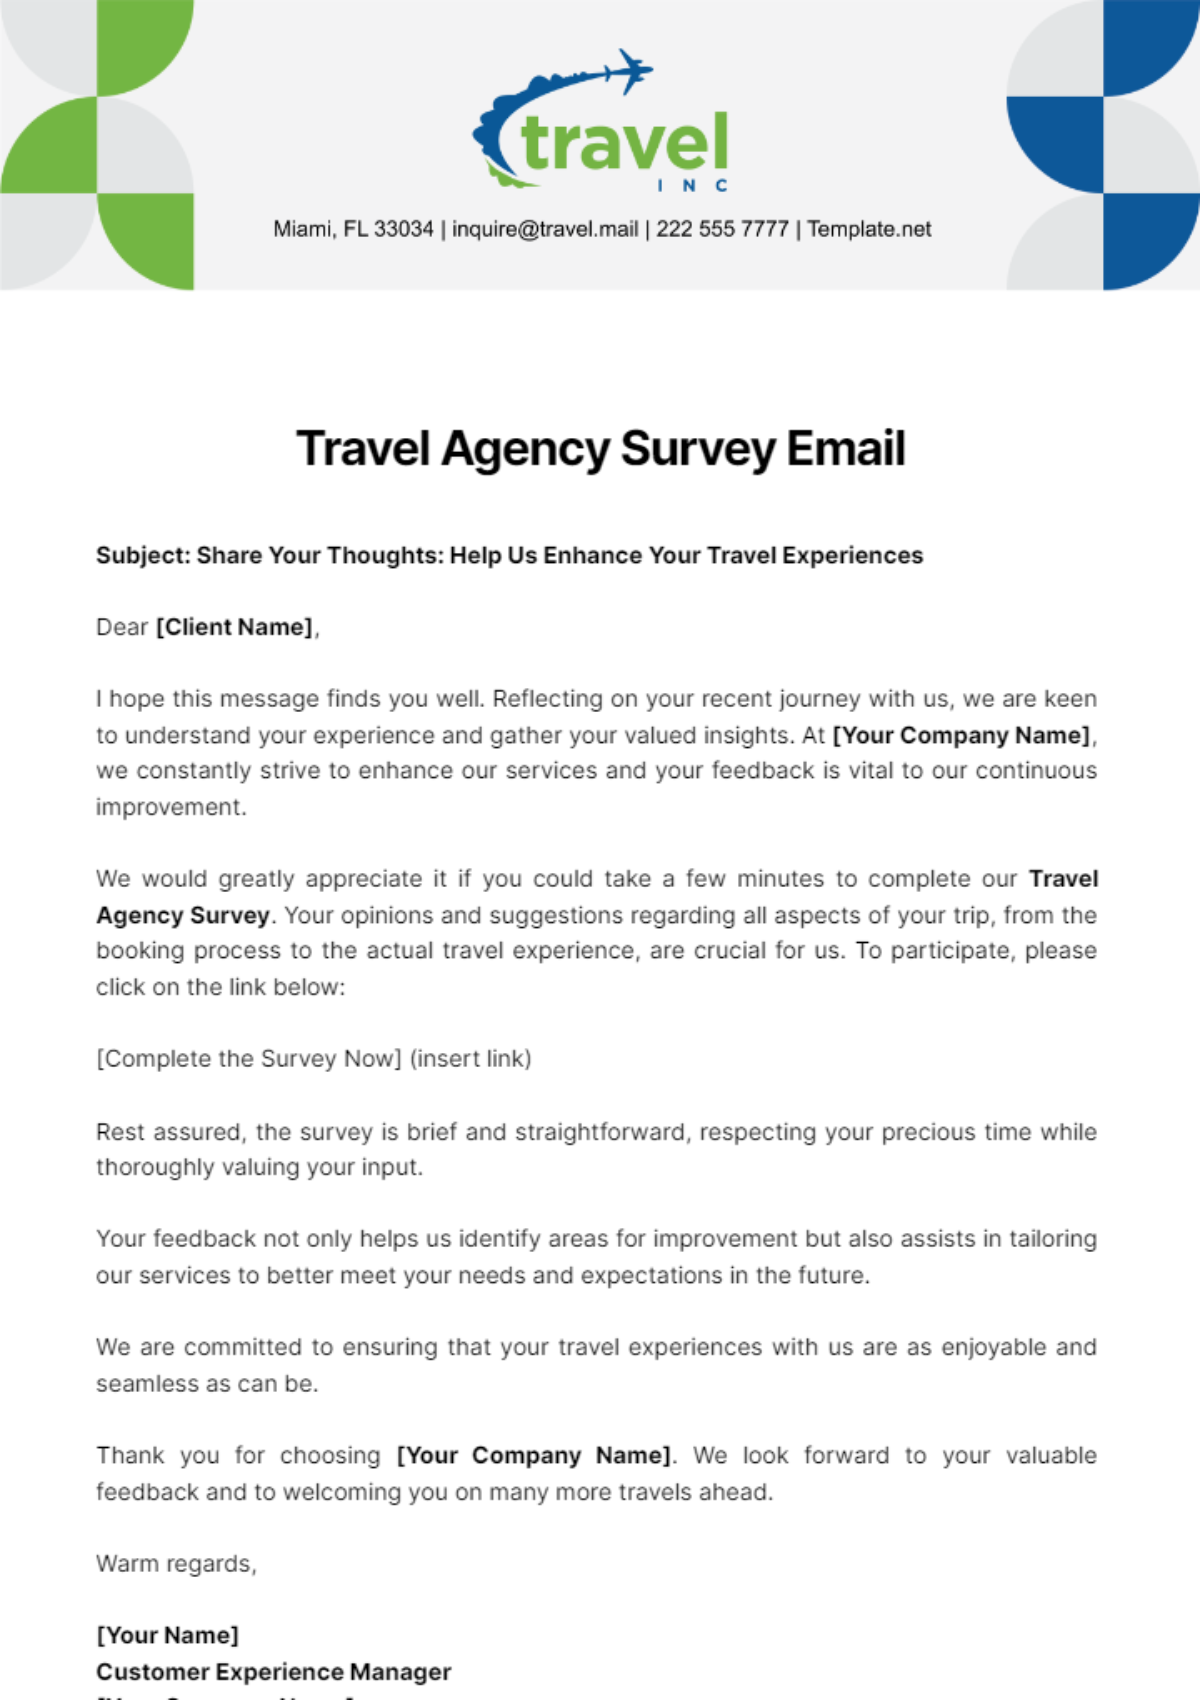 Travel Agency Survey Email Template